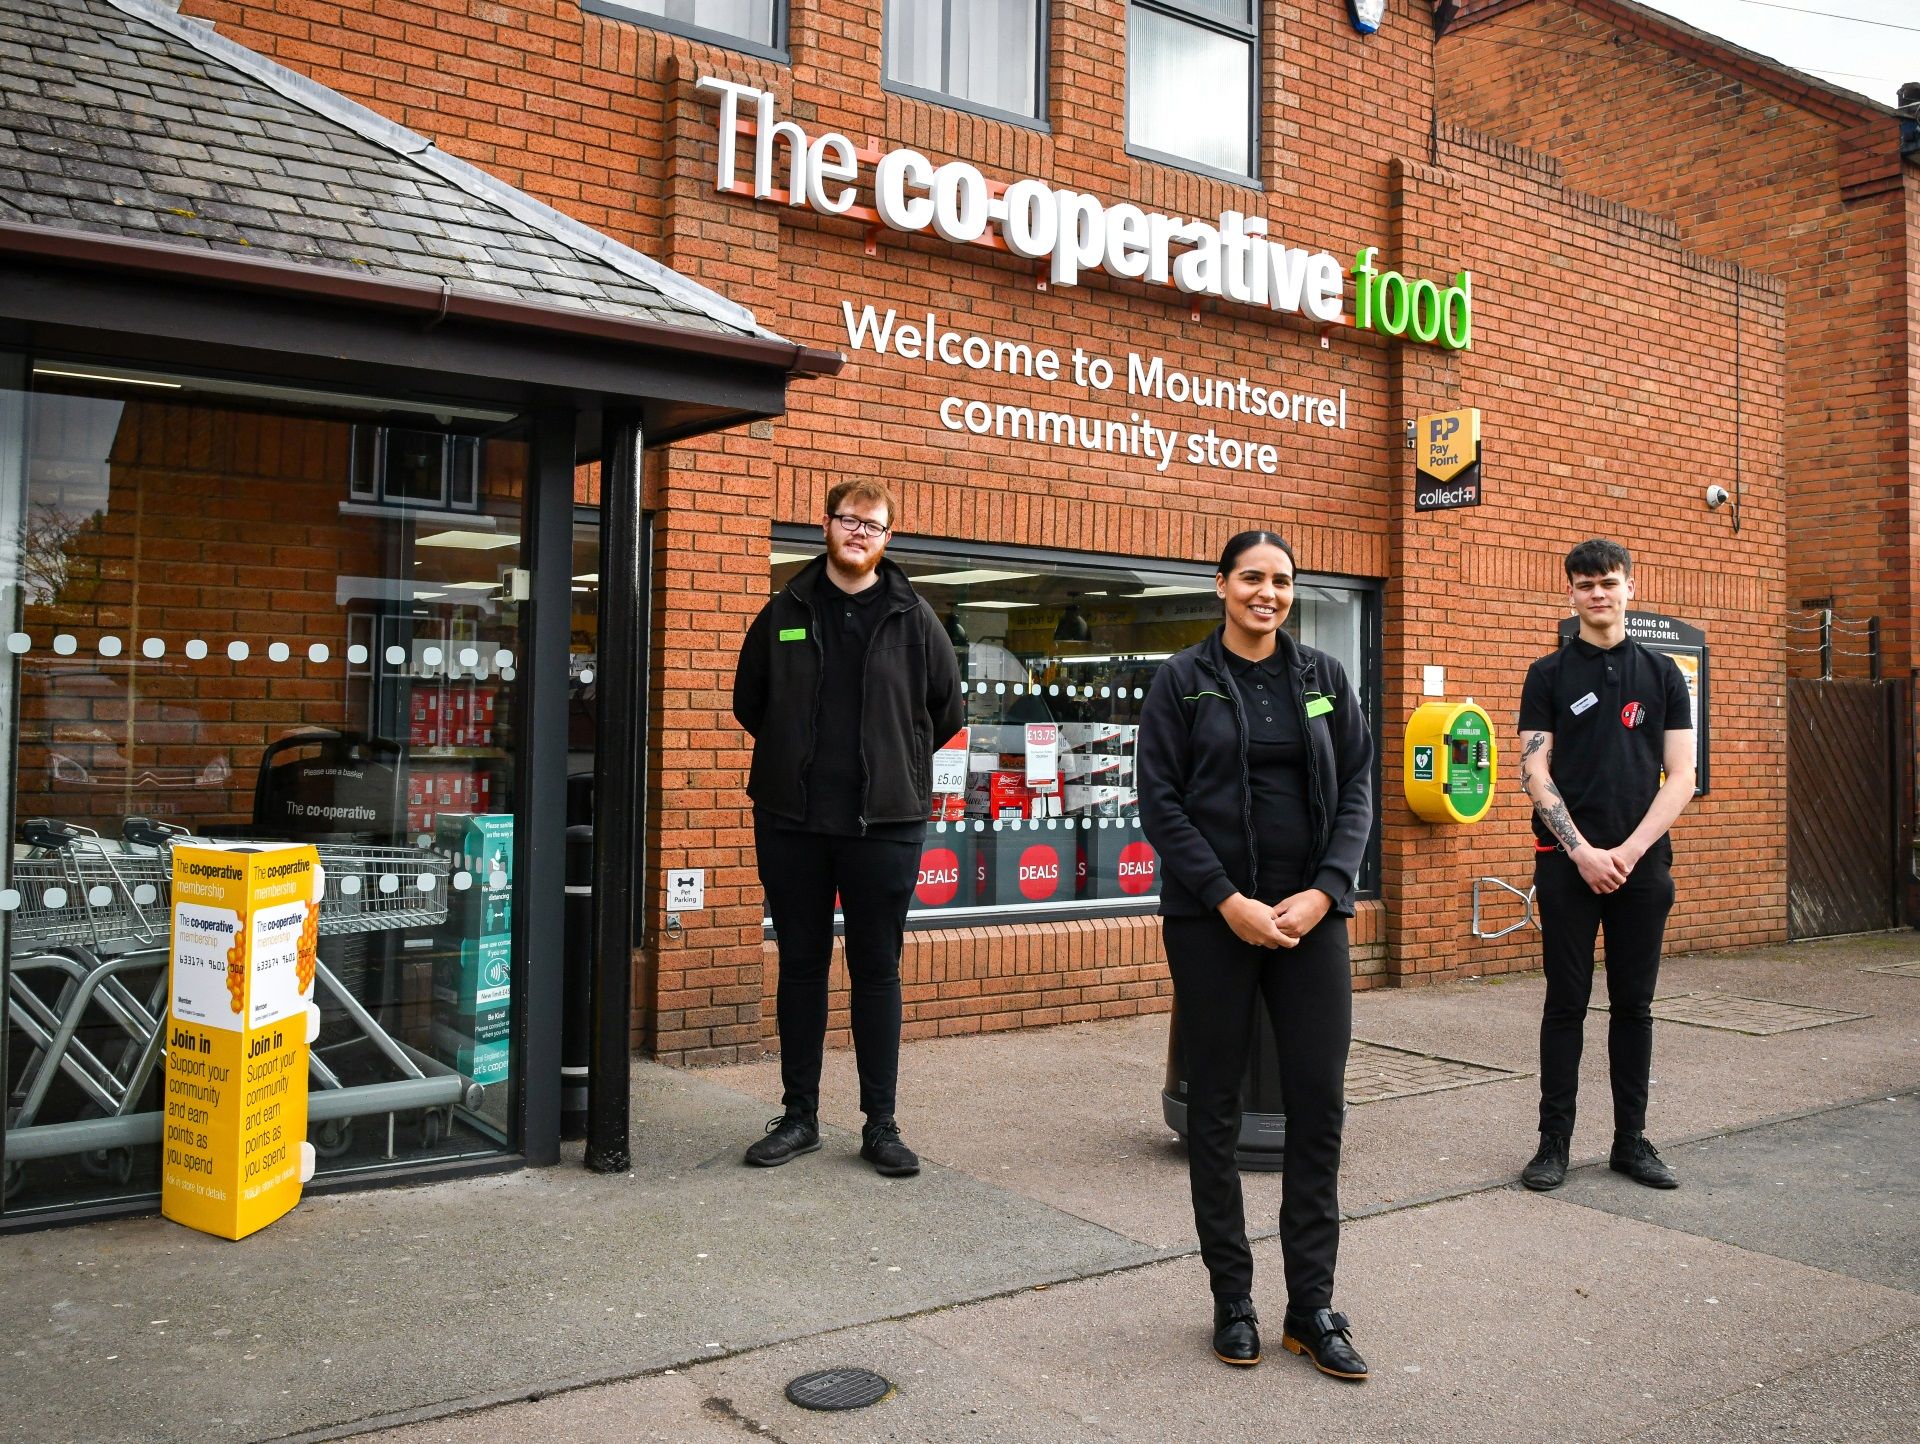 Mountsorrel food store gets fresh new look with £55k makeover